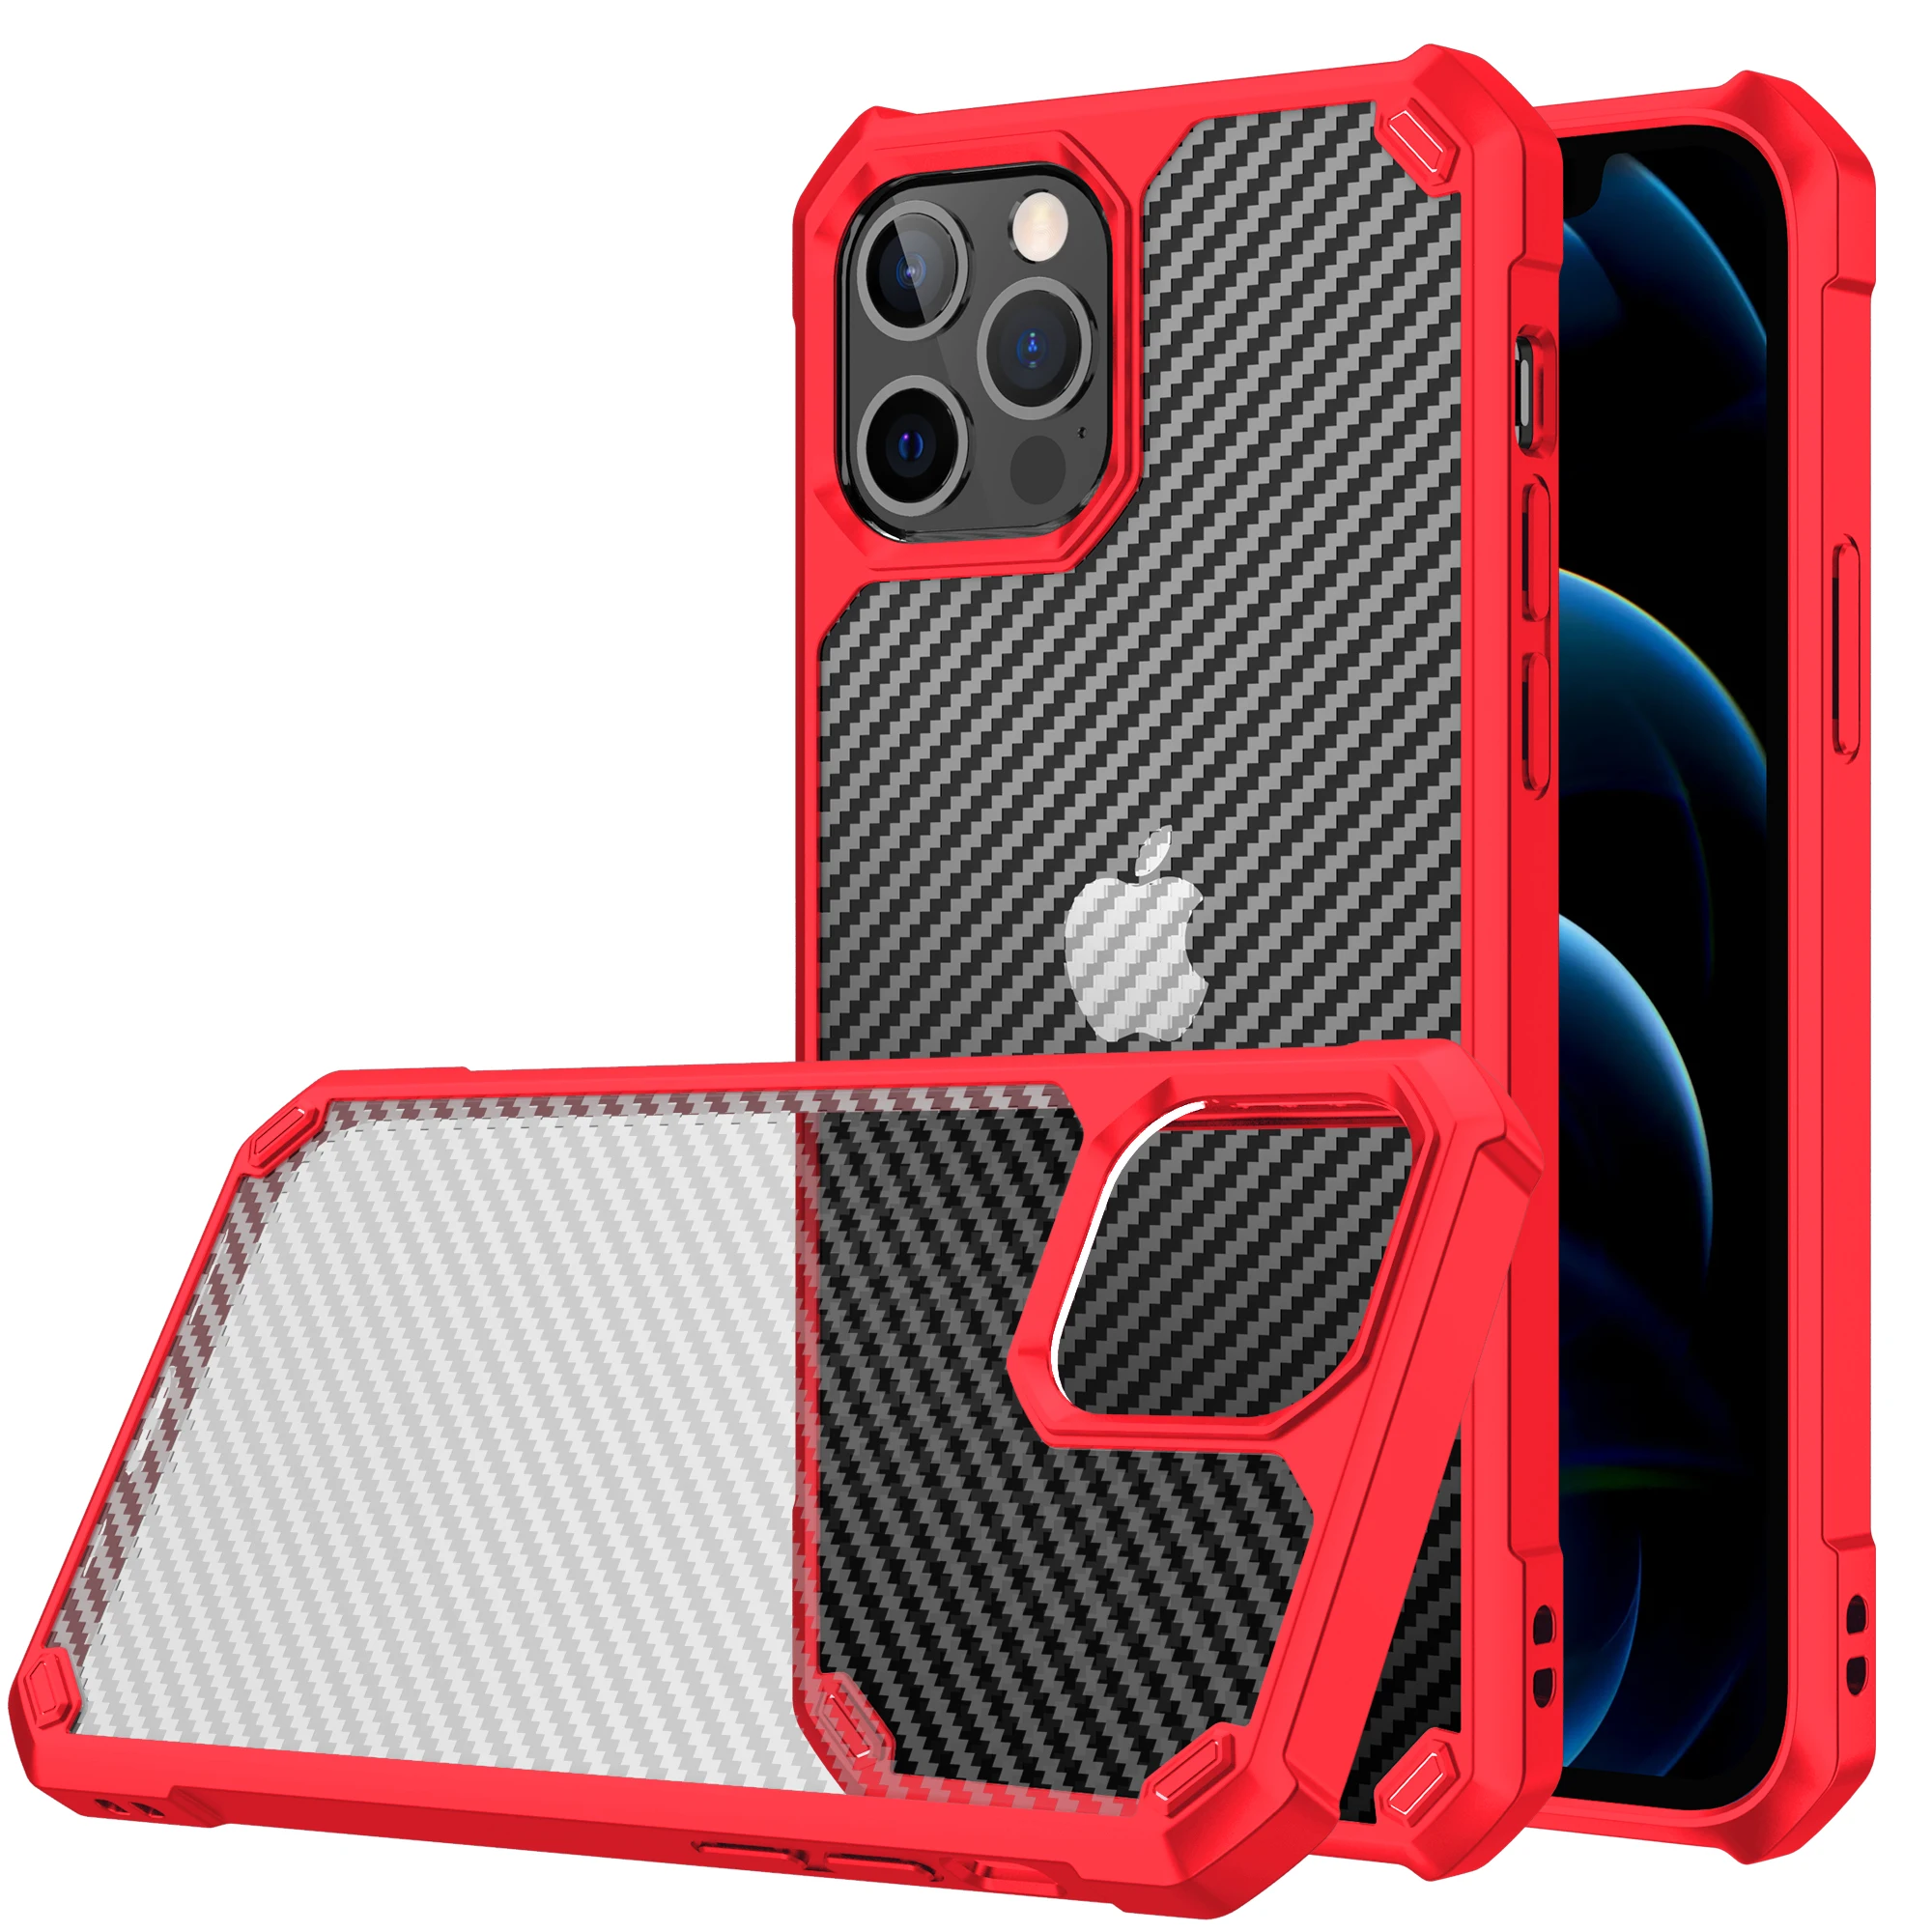 

Shockproof Clear Carbon Fiber Phone Case Acrylic+TPU Phone Case For Samsung Galaxy Note 20 Ultra Anti Shock Hard Back Cover, As picture shows